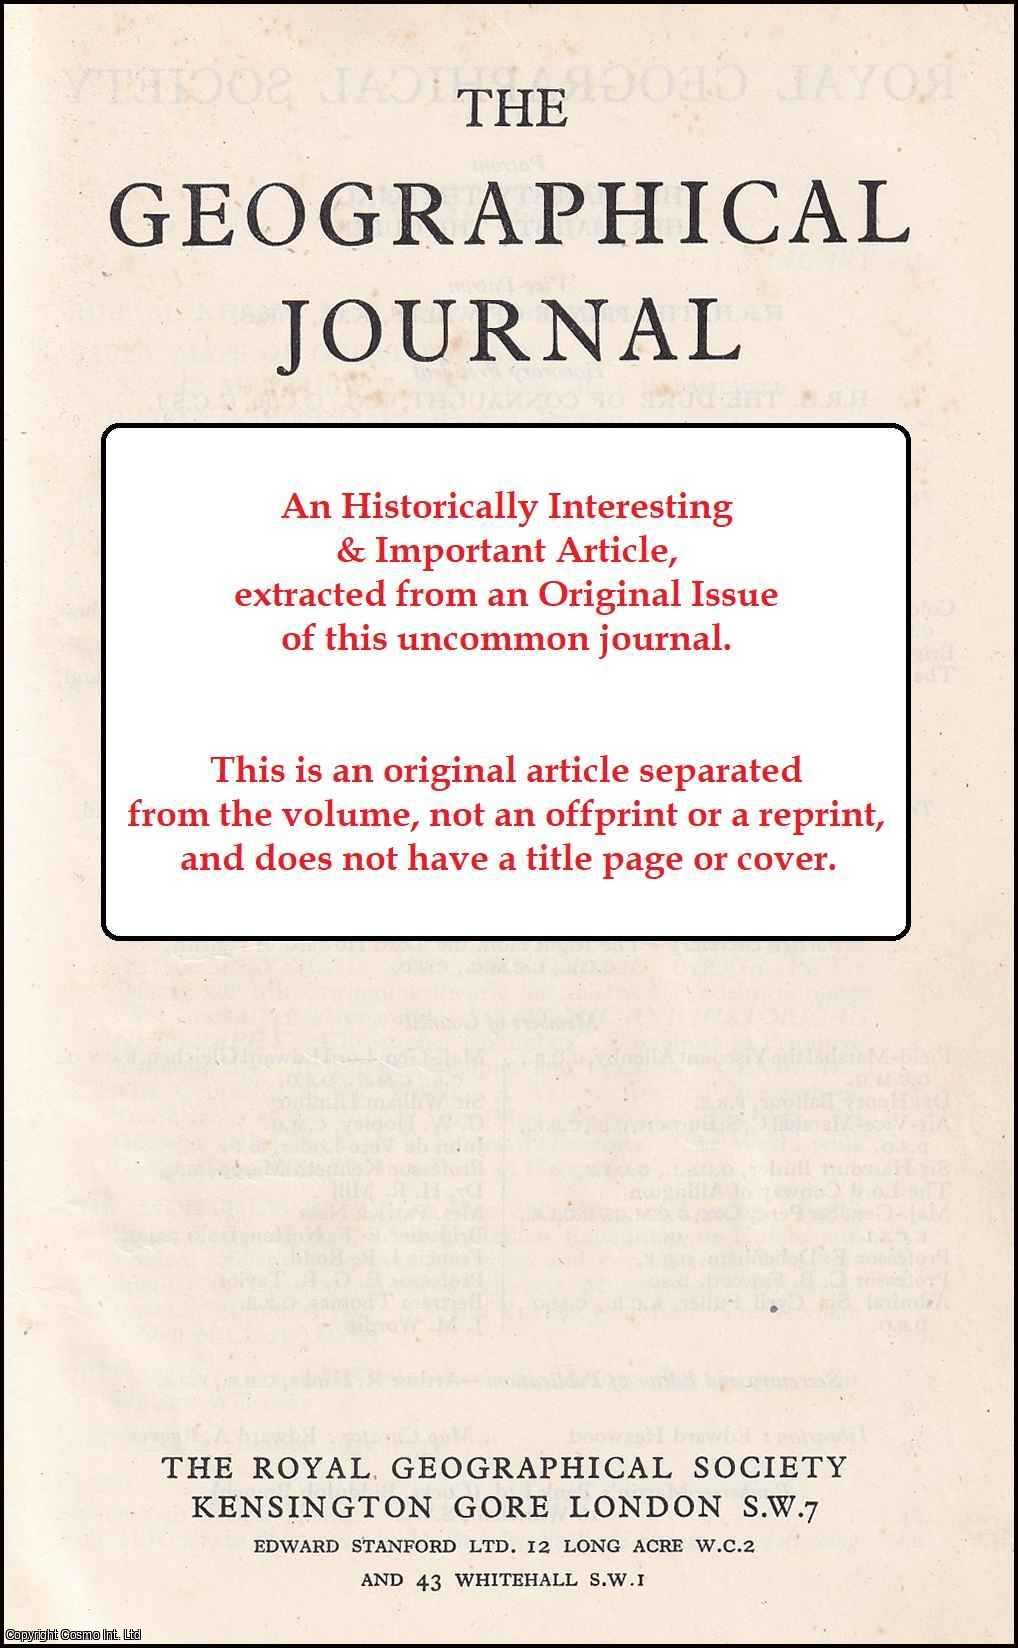 Denys Brundsden - The Bahrain Surface Materials Resources Survey and its Application to Regional Planning. An original article from the Geographical Journal, 1979.